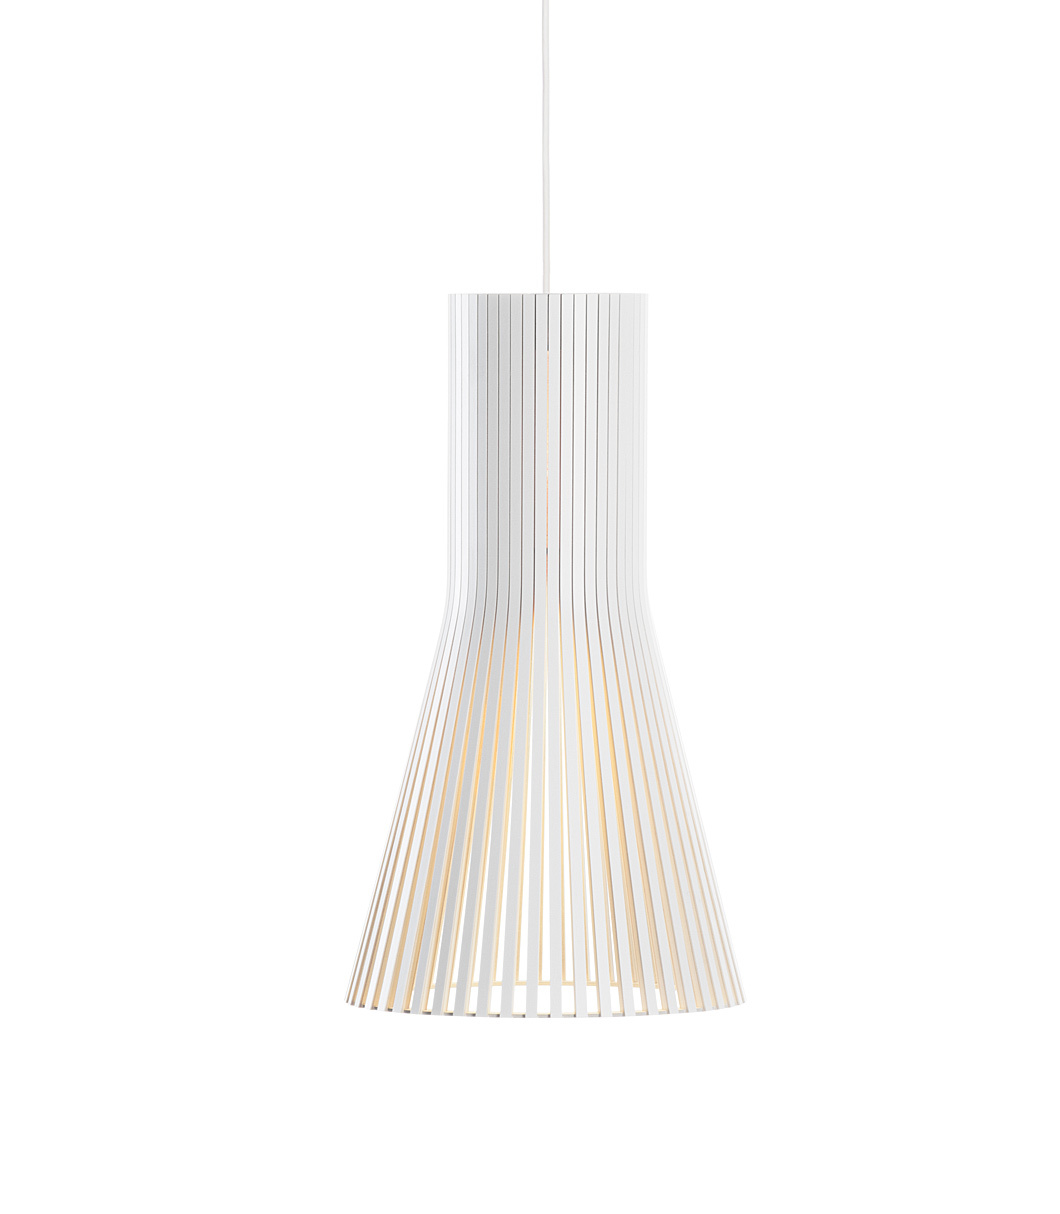 Secto Small 4201 pendant lamp is available in white laminated